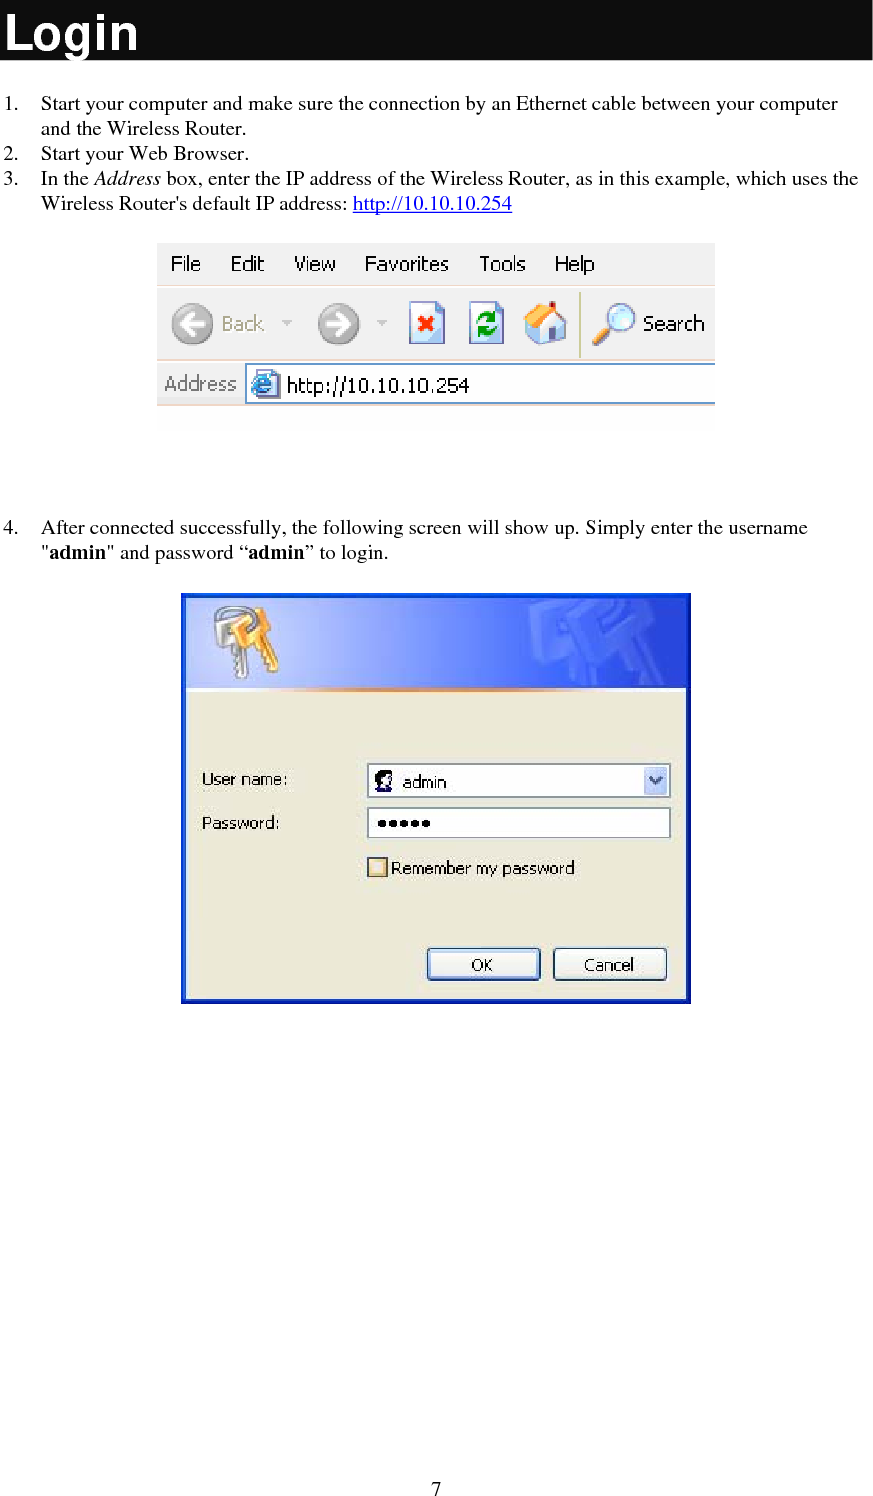   7Login 1. Start your computer and make sure the connection by an Ethernet cable between your computer and the Wireless Router. 2. Start your Web Browser. 3. In the Address box, enter the IP address of the Wireless Router, as in this example, which uses the Wireless Router&apos;s default IP address: http://10.10.10.254   4. After connected successfully, the following screen will show up. Simply enter the username &quot;admin&quot; and password “admin” to login.   